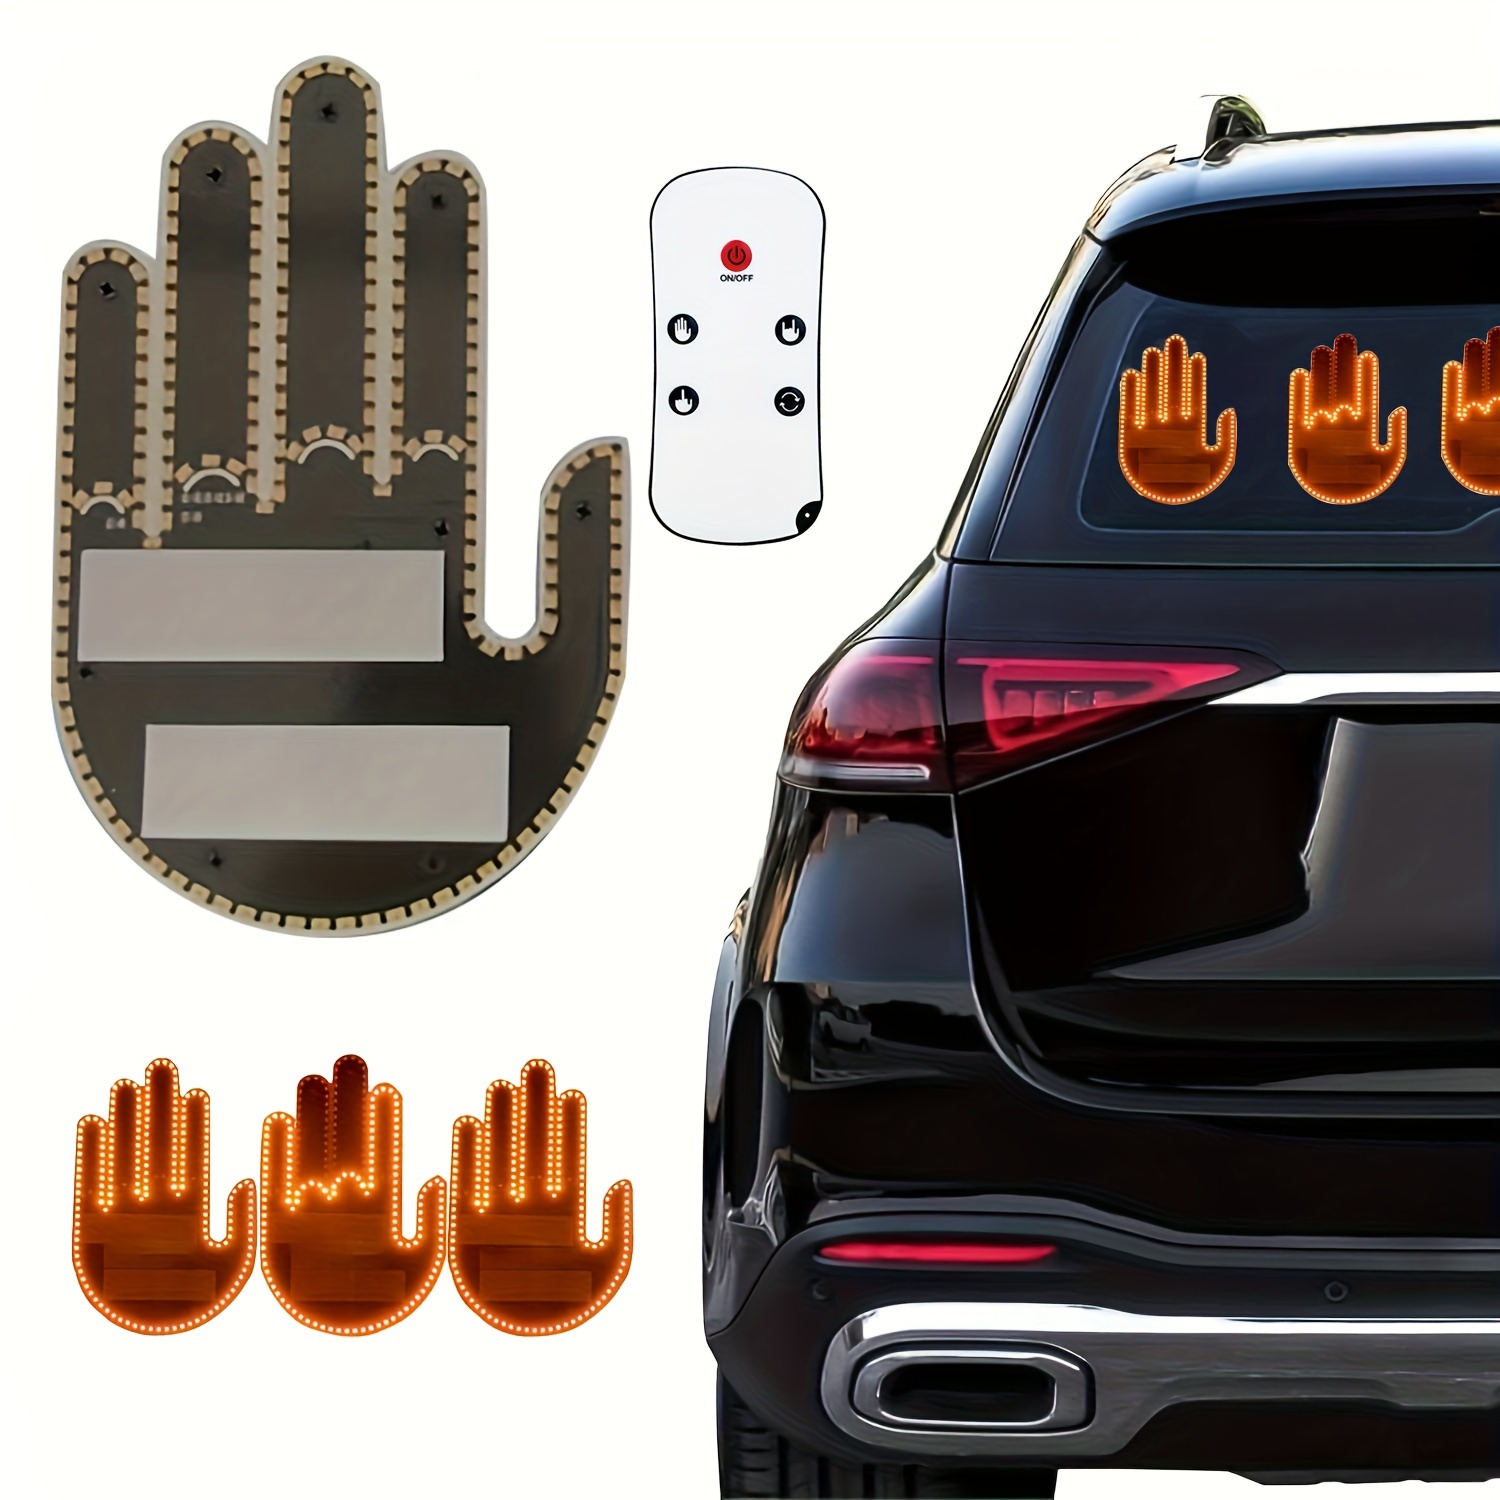 

Funny Gesture Led Glowing Finger Sign With Remote Control, Light With Remote Control, Funny Gesture Finger Light Led Car Rear Window Sign, Led Sign For Car, Suv, Truck